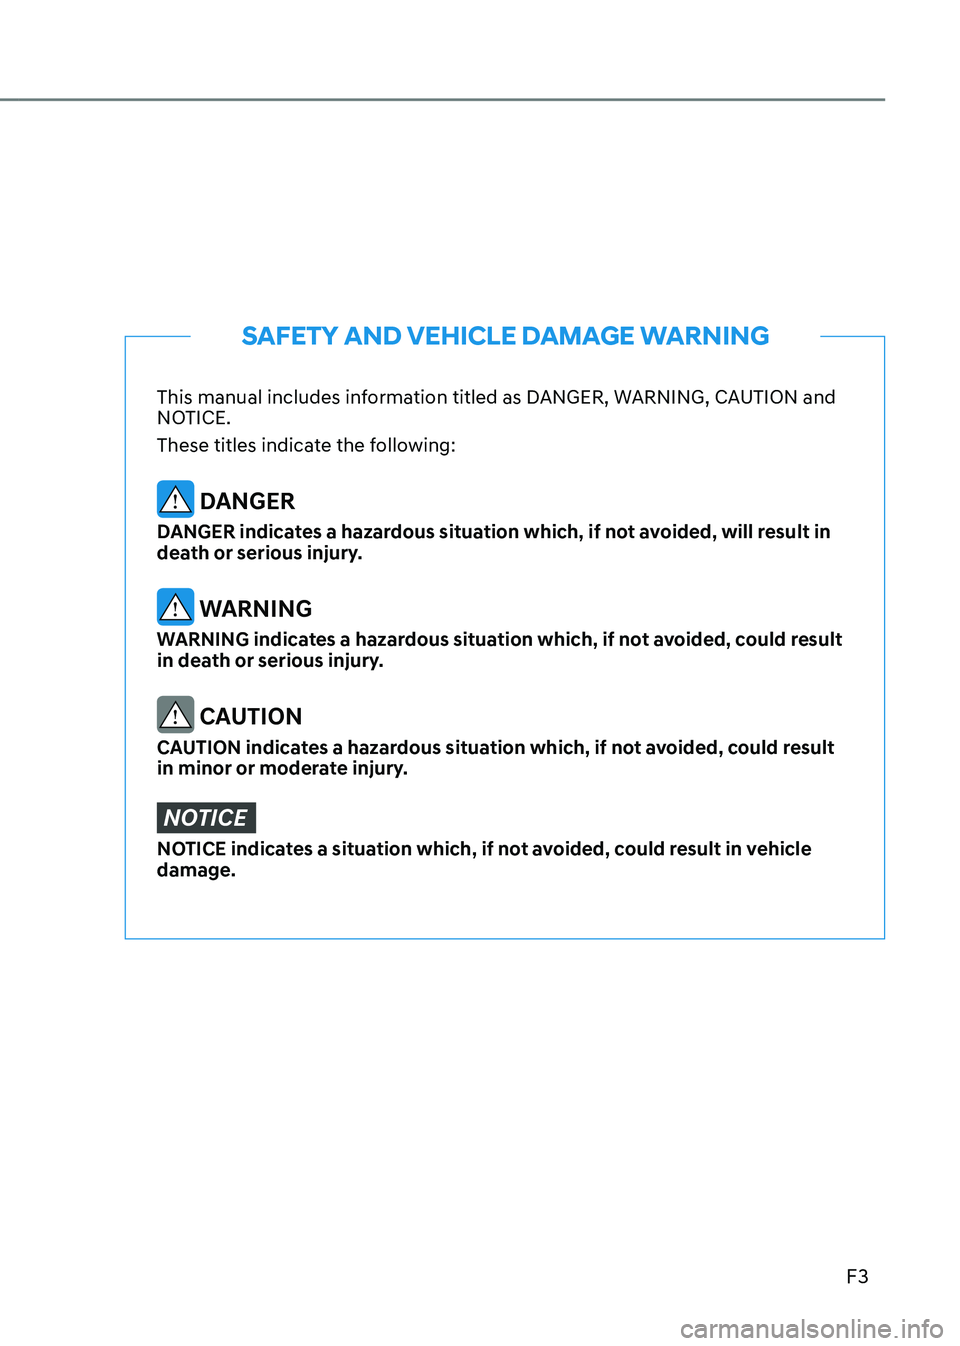 HYUNDAI KONA EV 2022  Owners Manual F3
This manual includes information titled as DANGER, WARNING, CAUTION and  
NOTICE. 
These titles indicate the following:  
 DANGER
DANGER indicates a hazardous situation which, if not avoided, will 